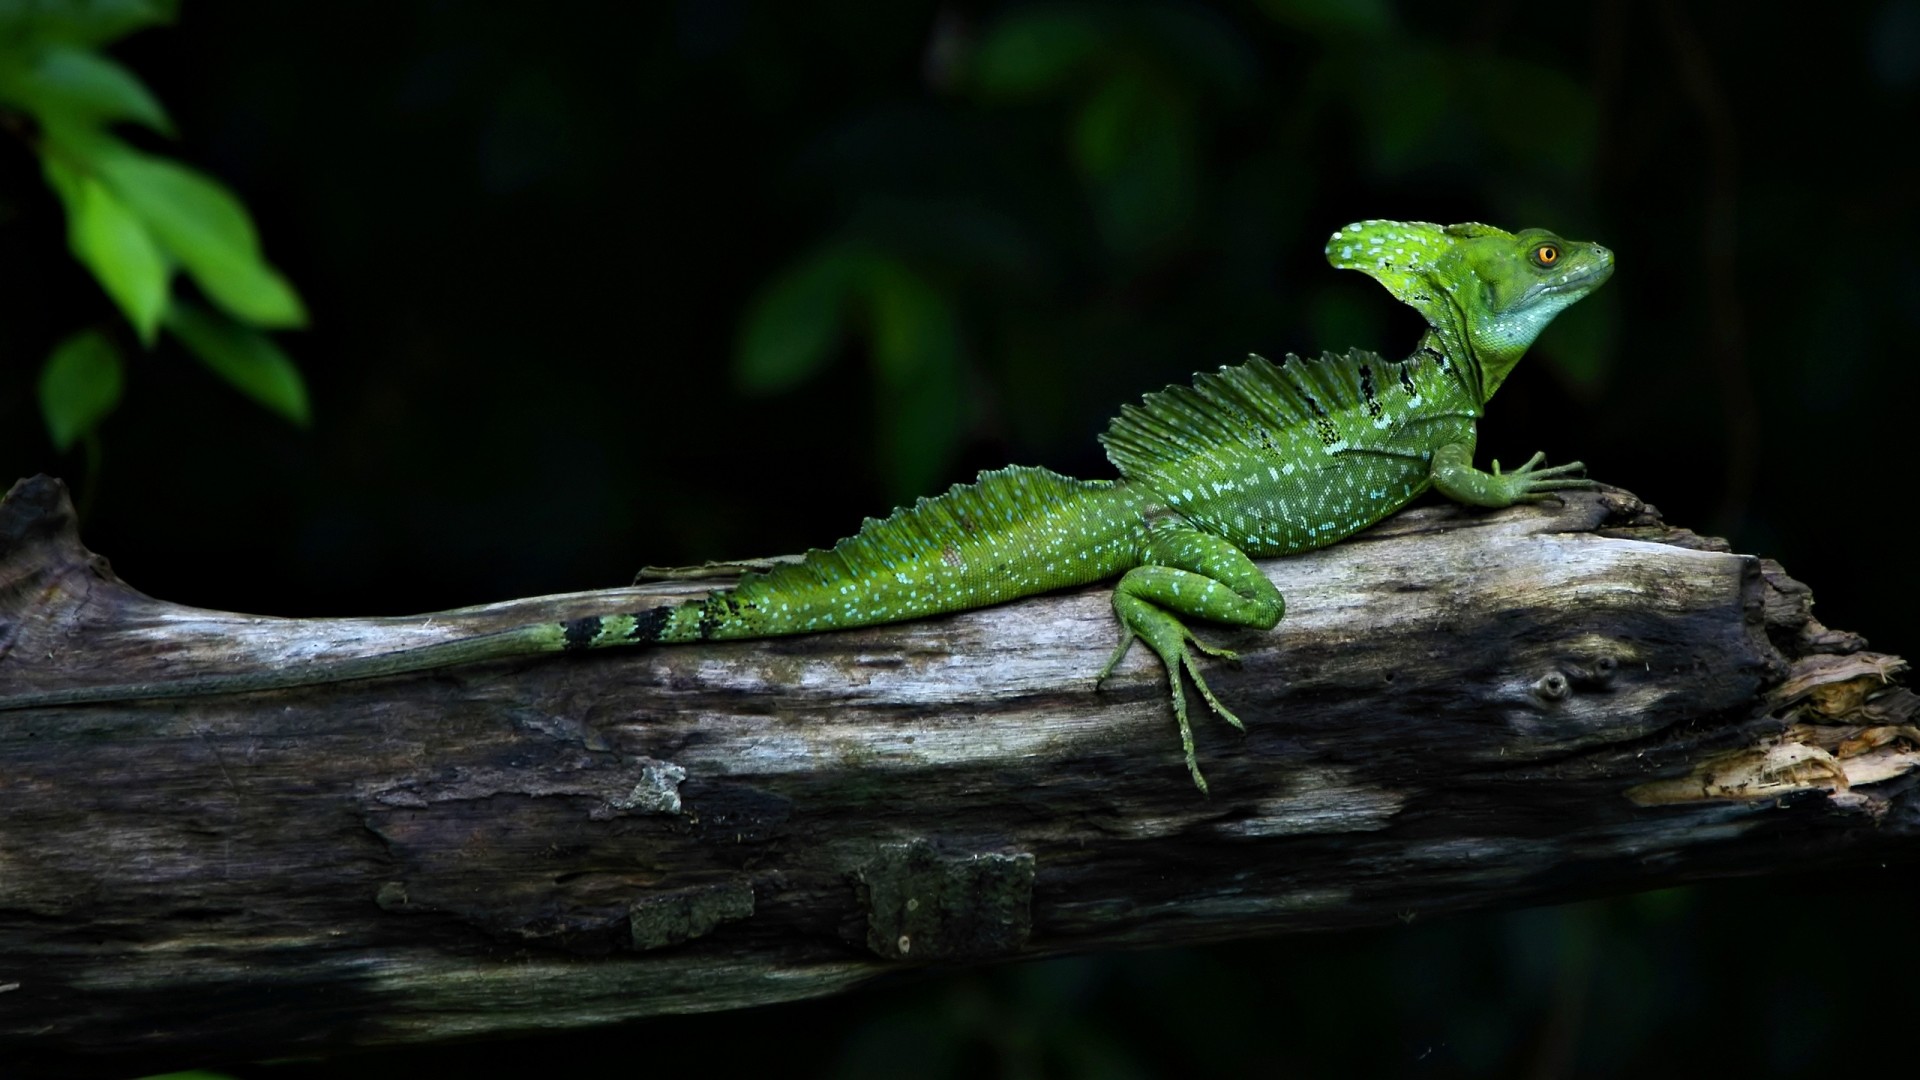 1920x1080 Green Reptile Hd Wallpapers Cool Desktop Background Pictures